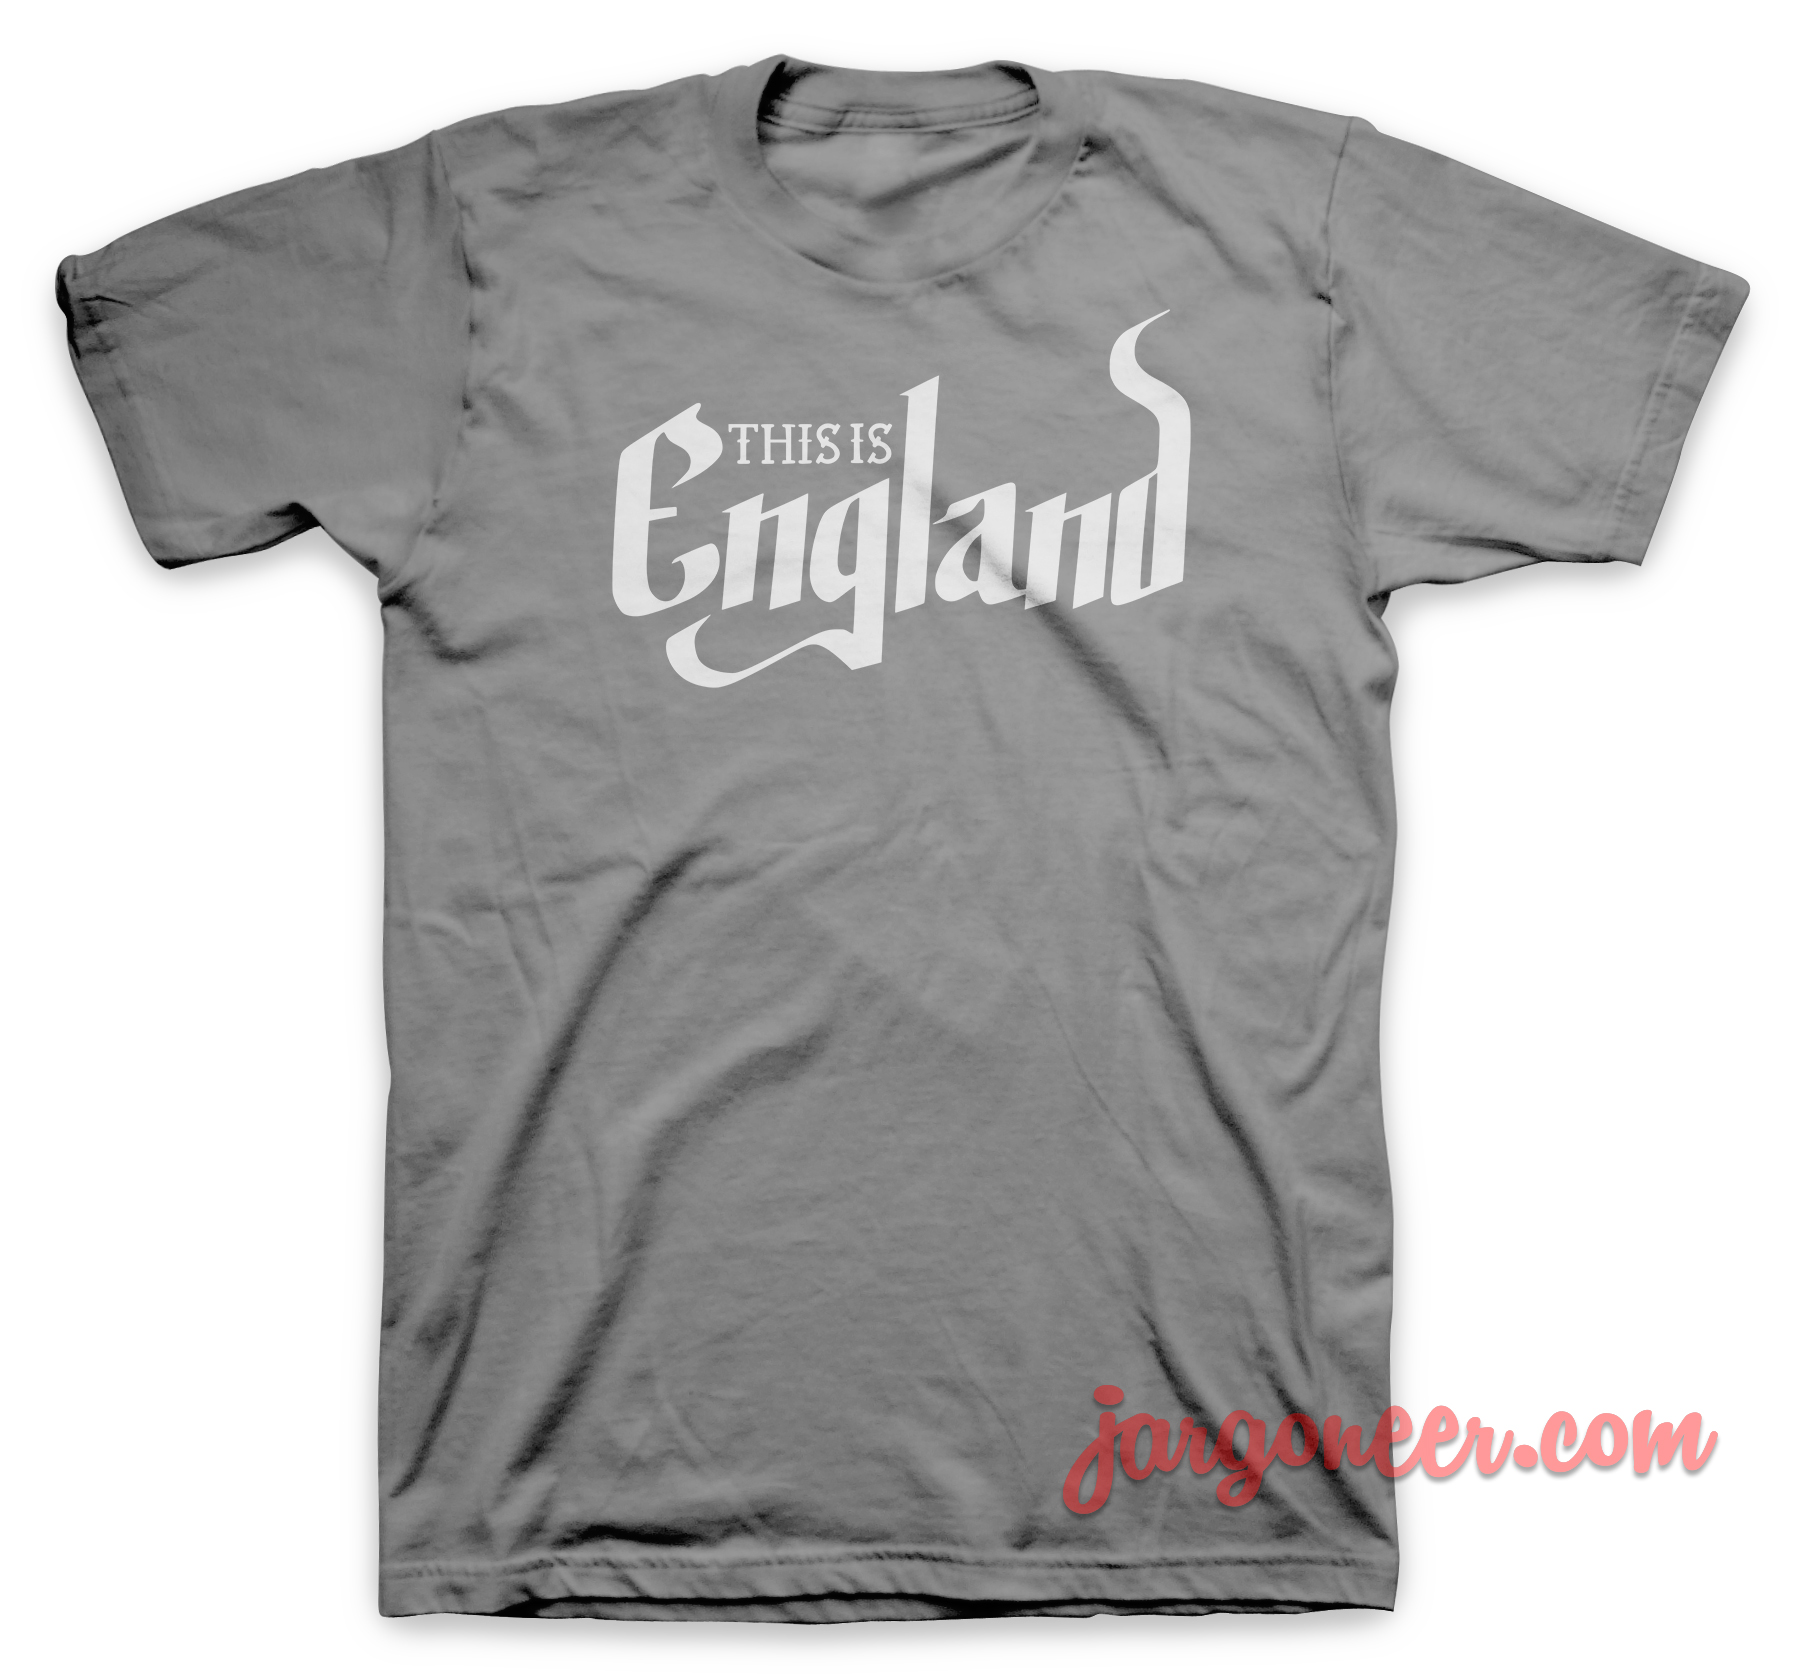 This Is England Gray T Shirt - Shop Unique Graphic Cool Shirt Designs